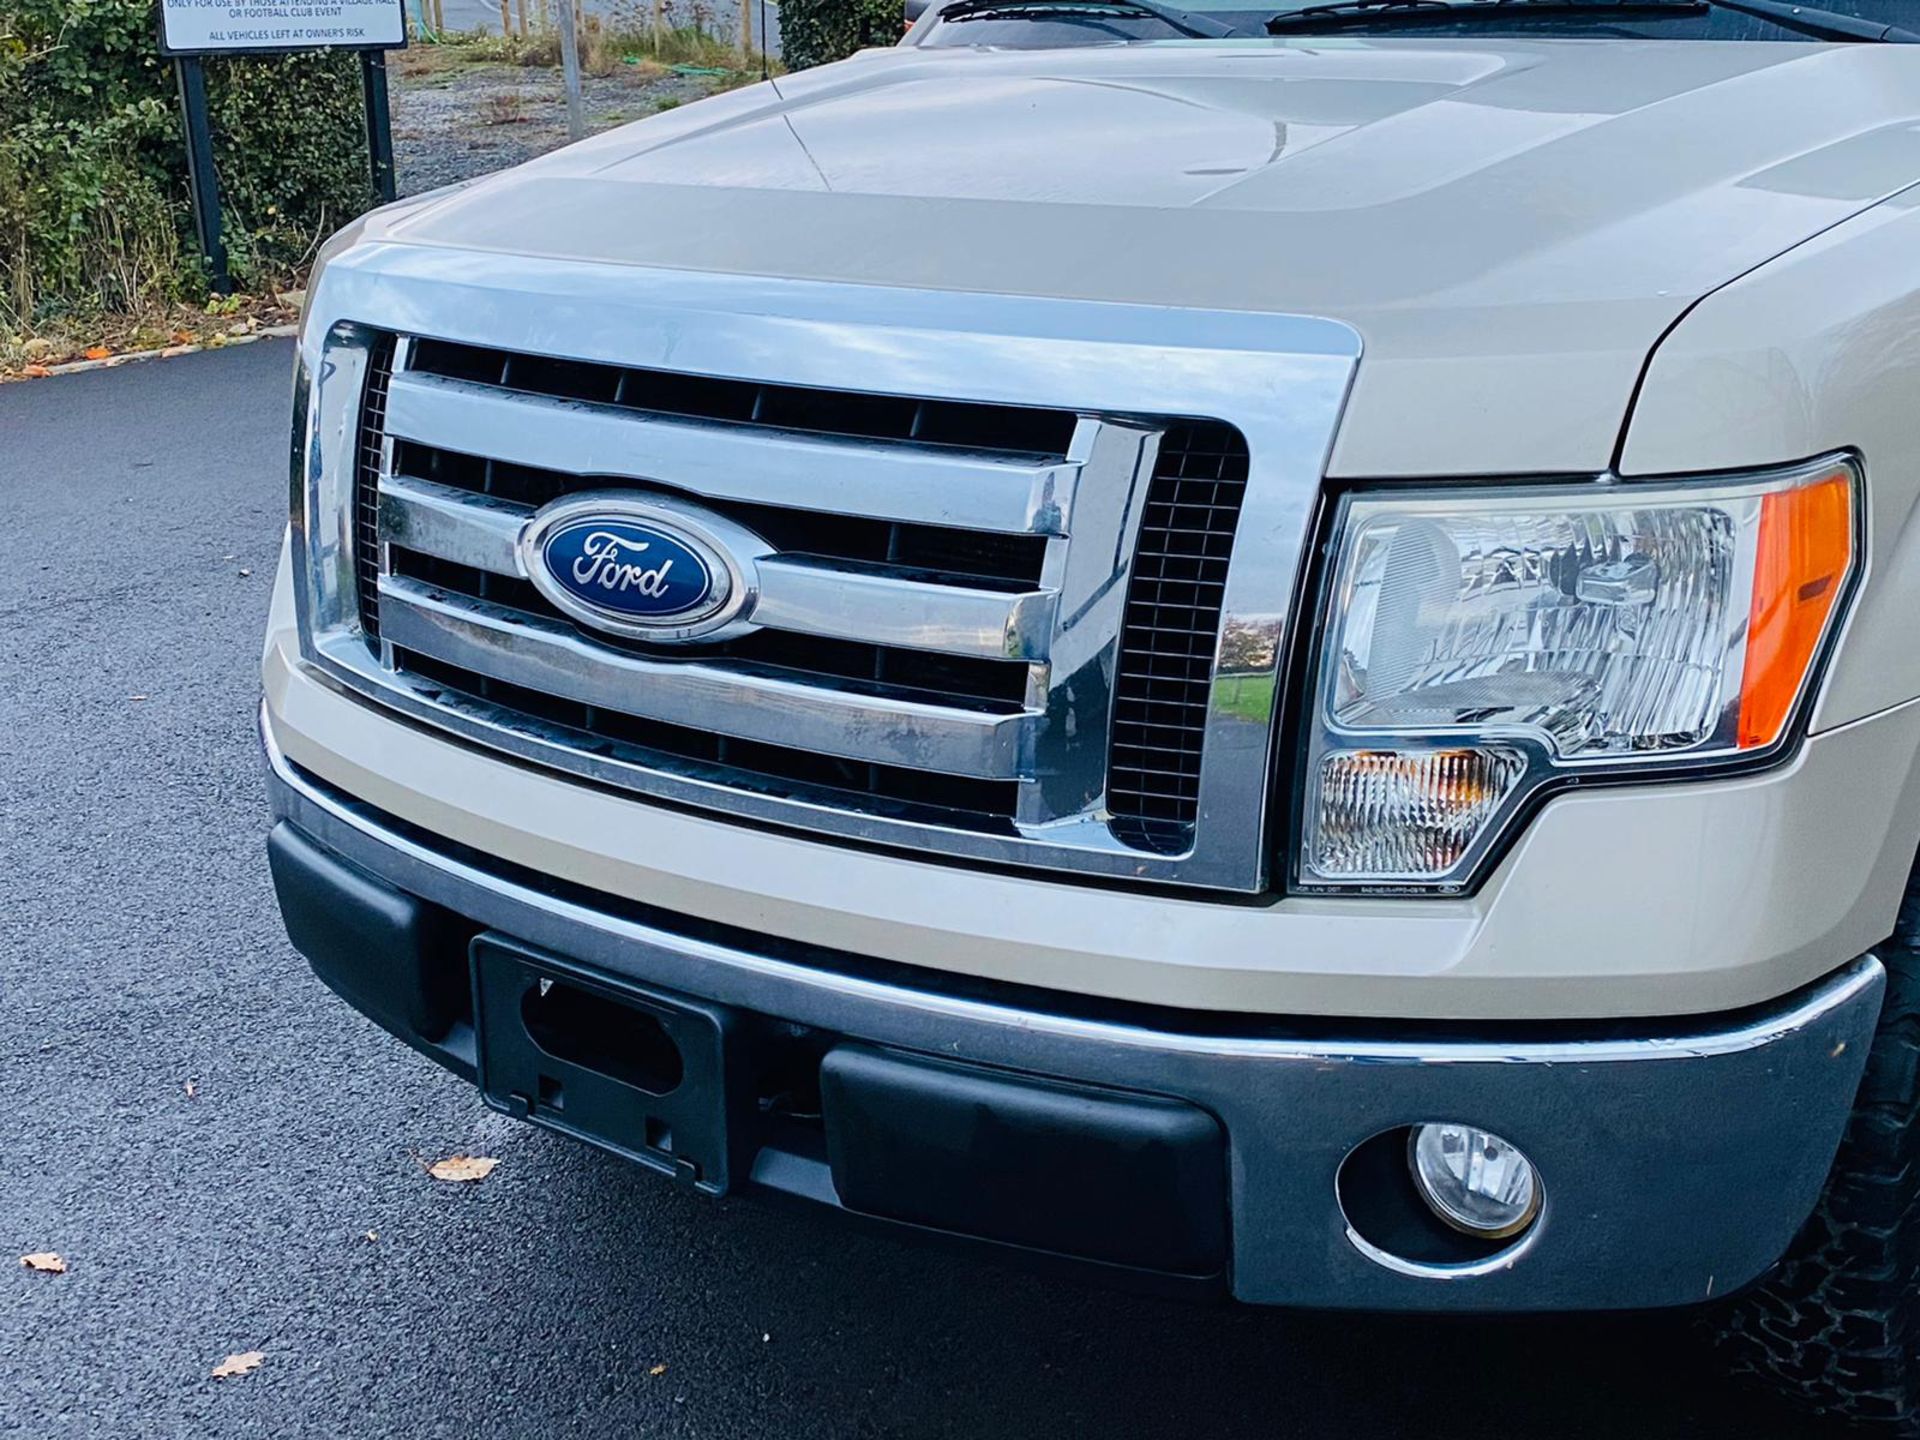 (RESERVE MET) Ford F-150 XLT 4.6L V8 Supercab - 2010 Year - 6 Seats - Fresh Imports - Image 9 of 39